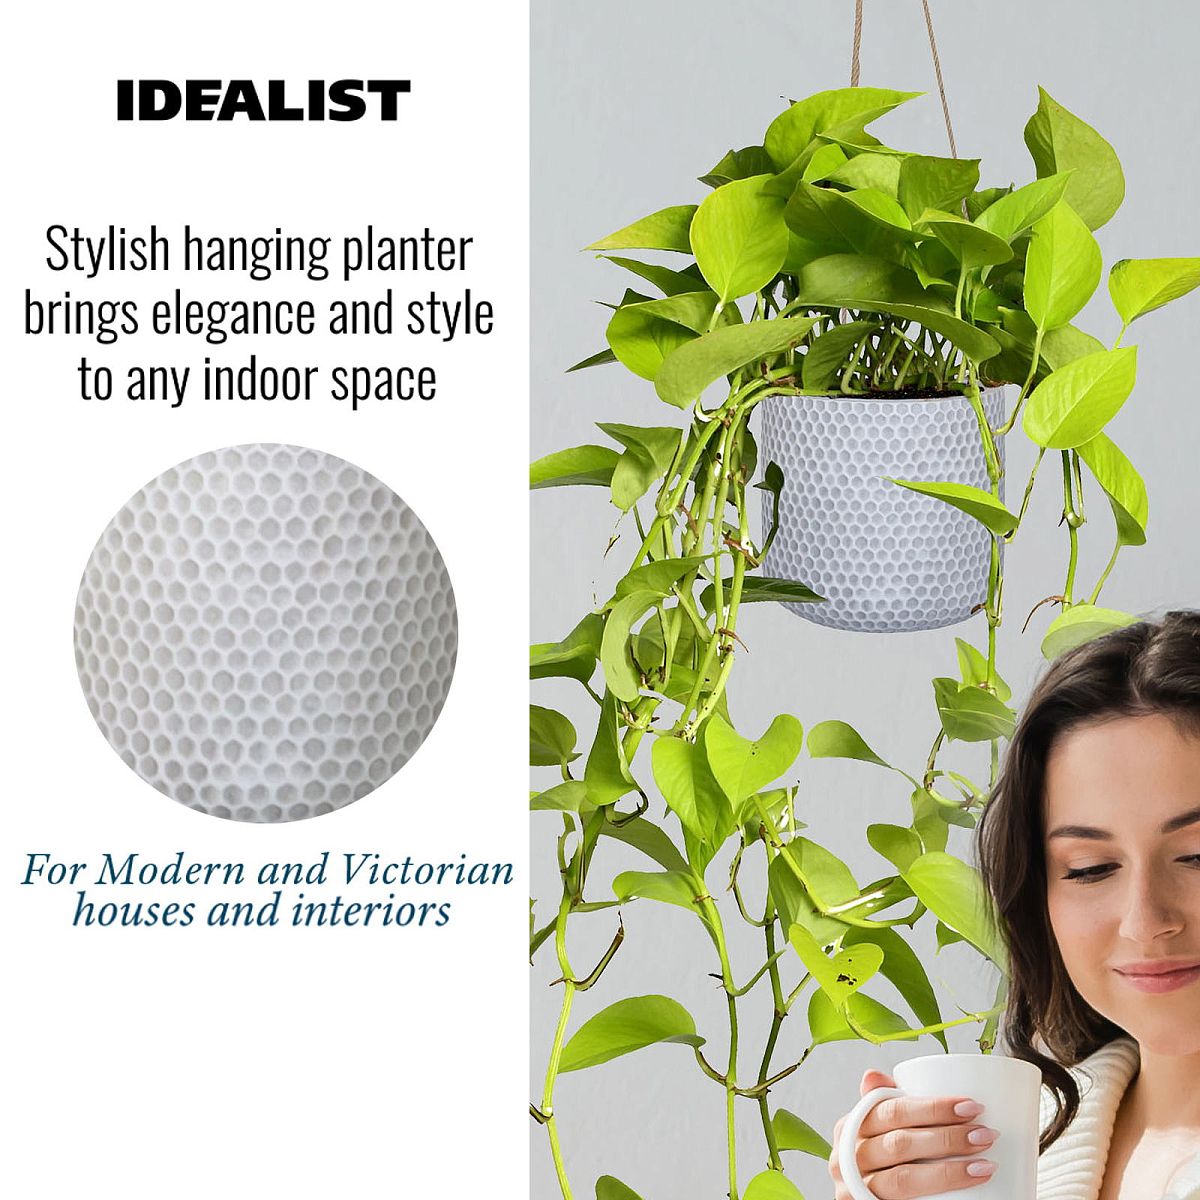 IDEALIST Lite Honeycomb Style Table and Hanging Cylinder Round Plant Pot Dual Use Indoor Planter